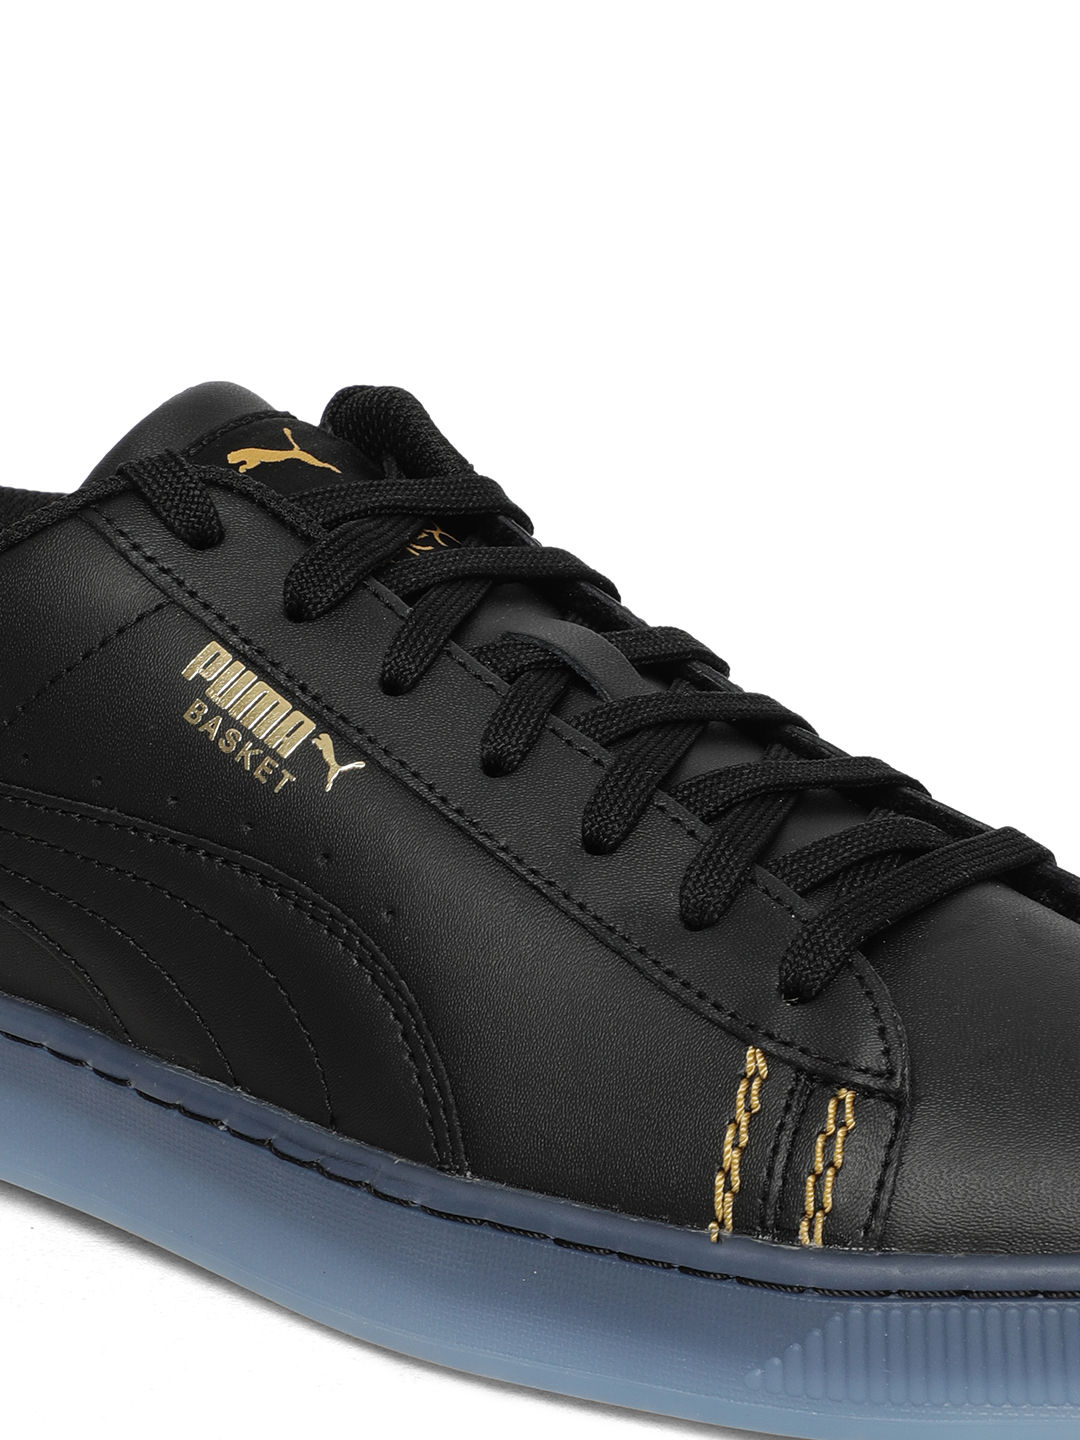 Puma Sneakers : Buy Puma Ace One8 Mens Black Sneakers Online | Nykaa Fashion